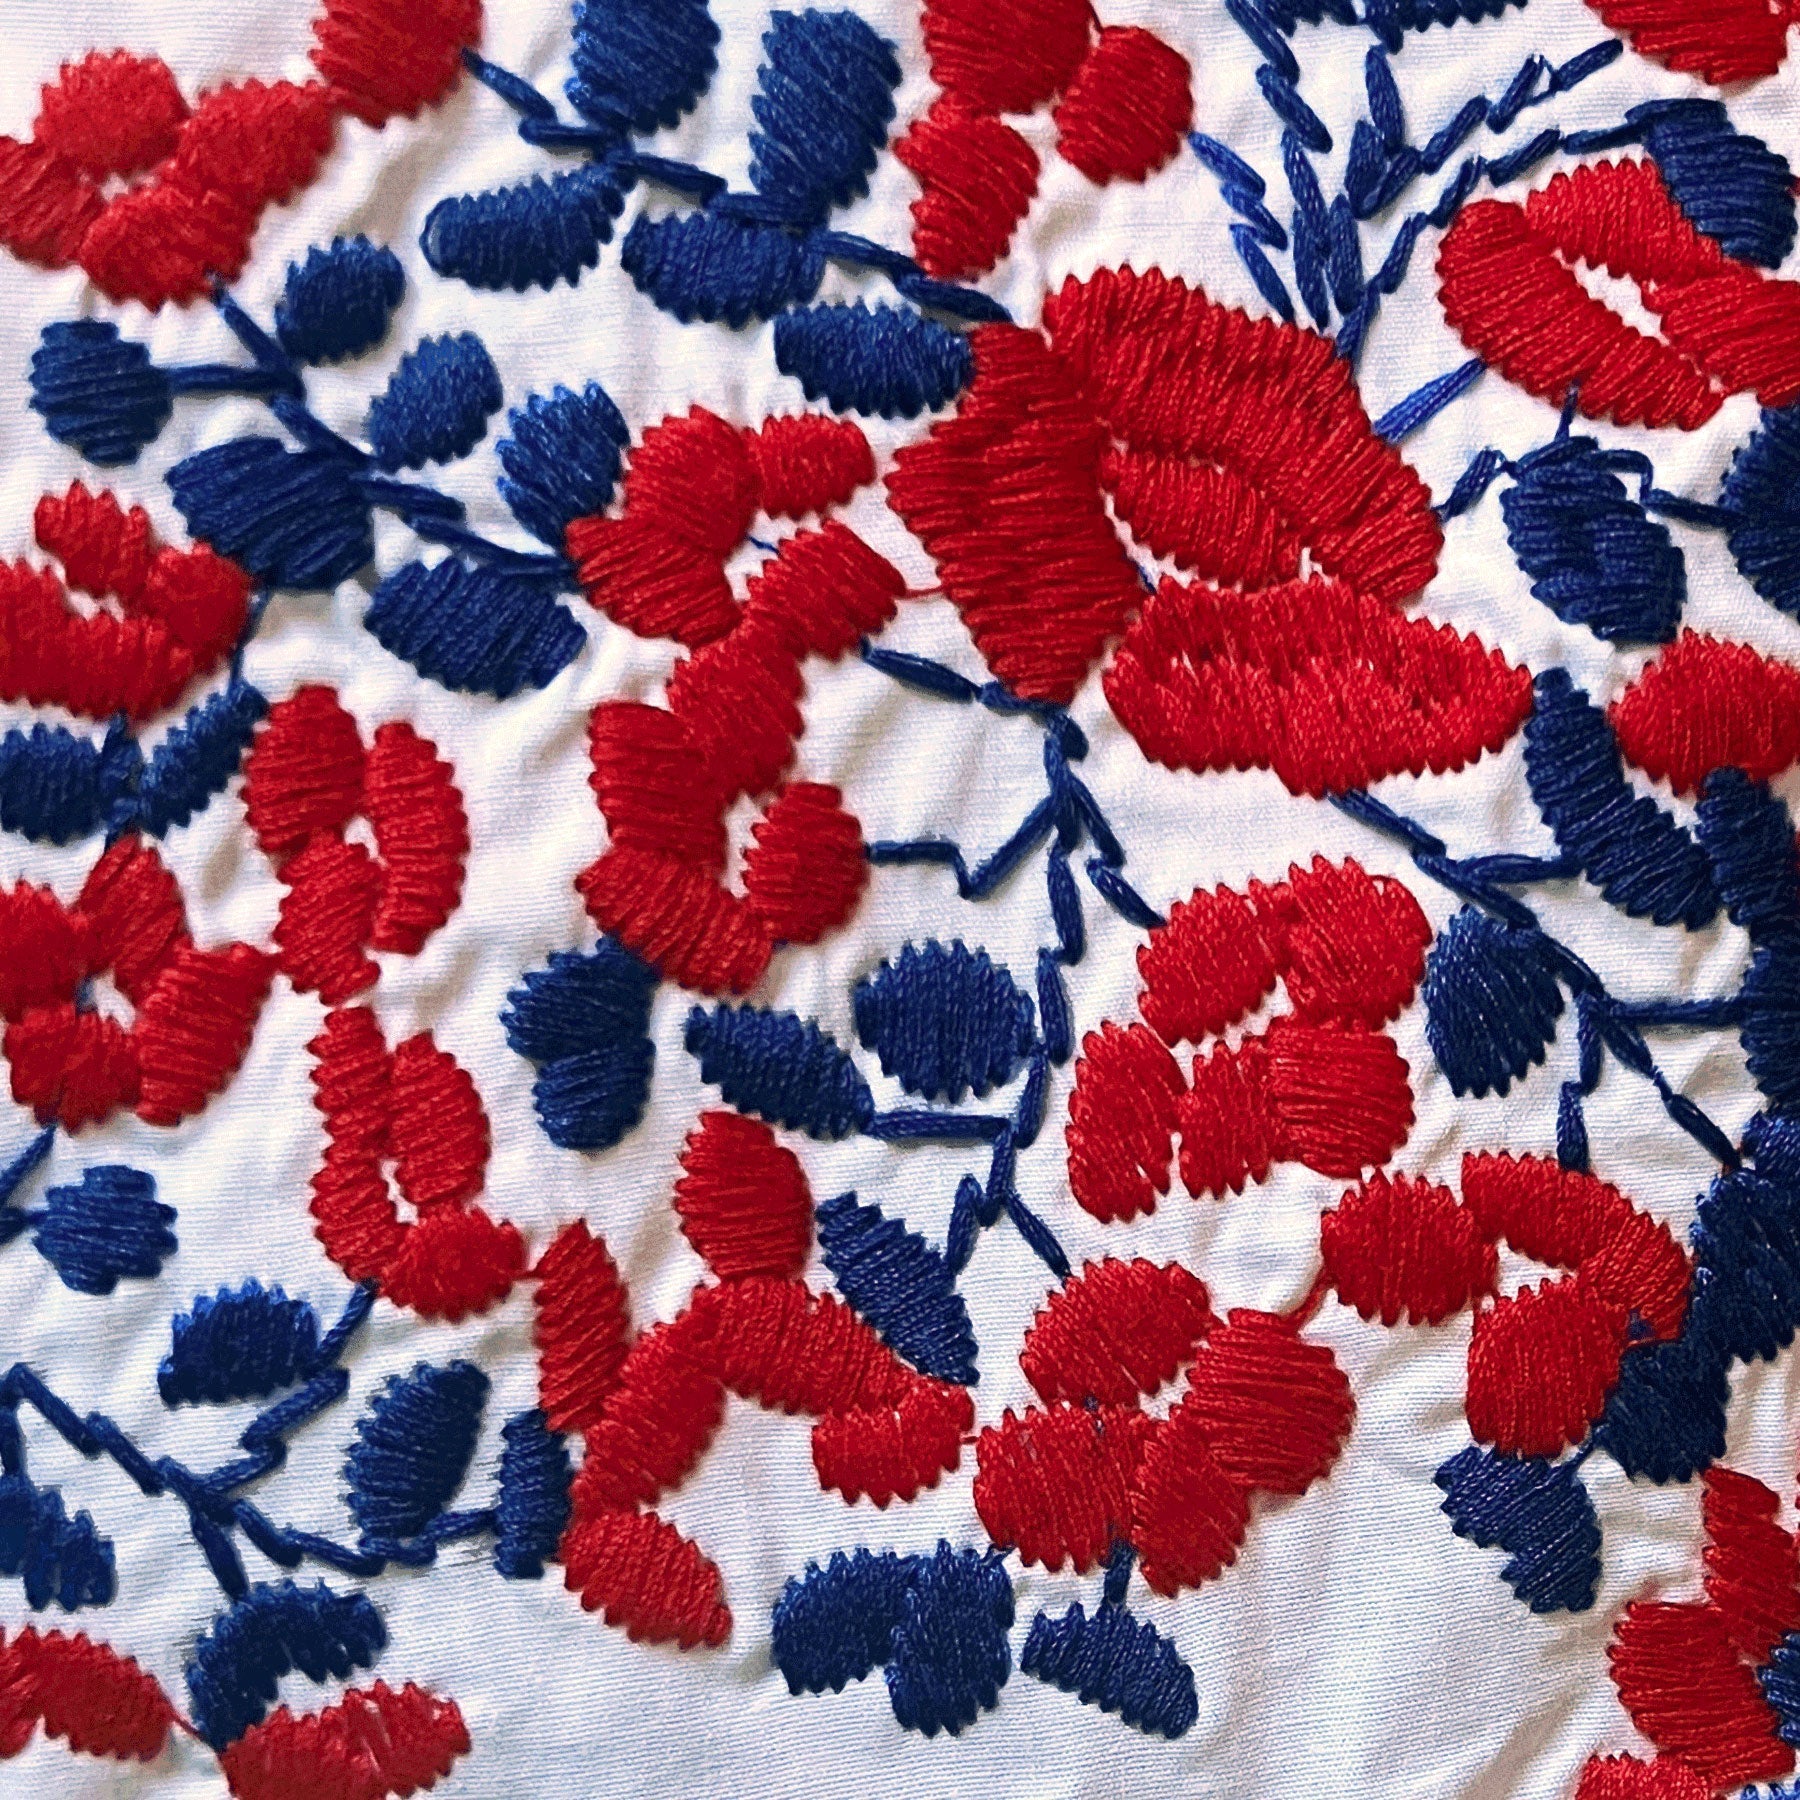 PRE-ORDER: Fourth of July White Hummingbird Dress (mid-June delivery)